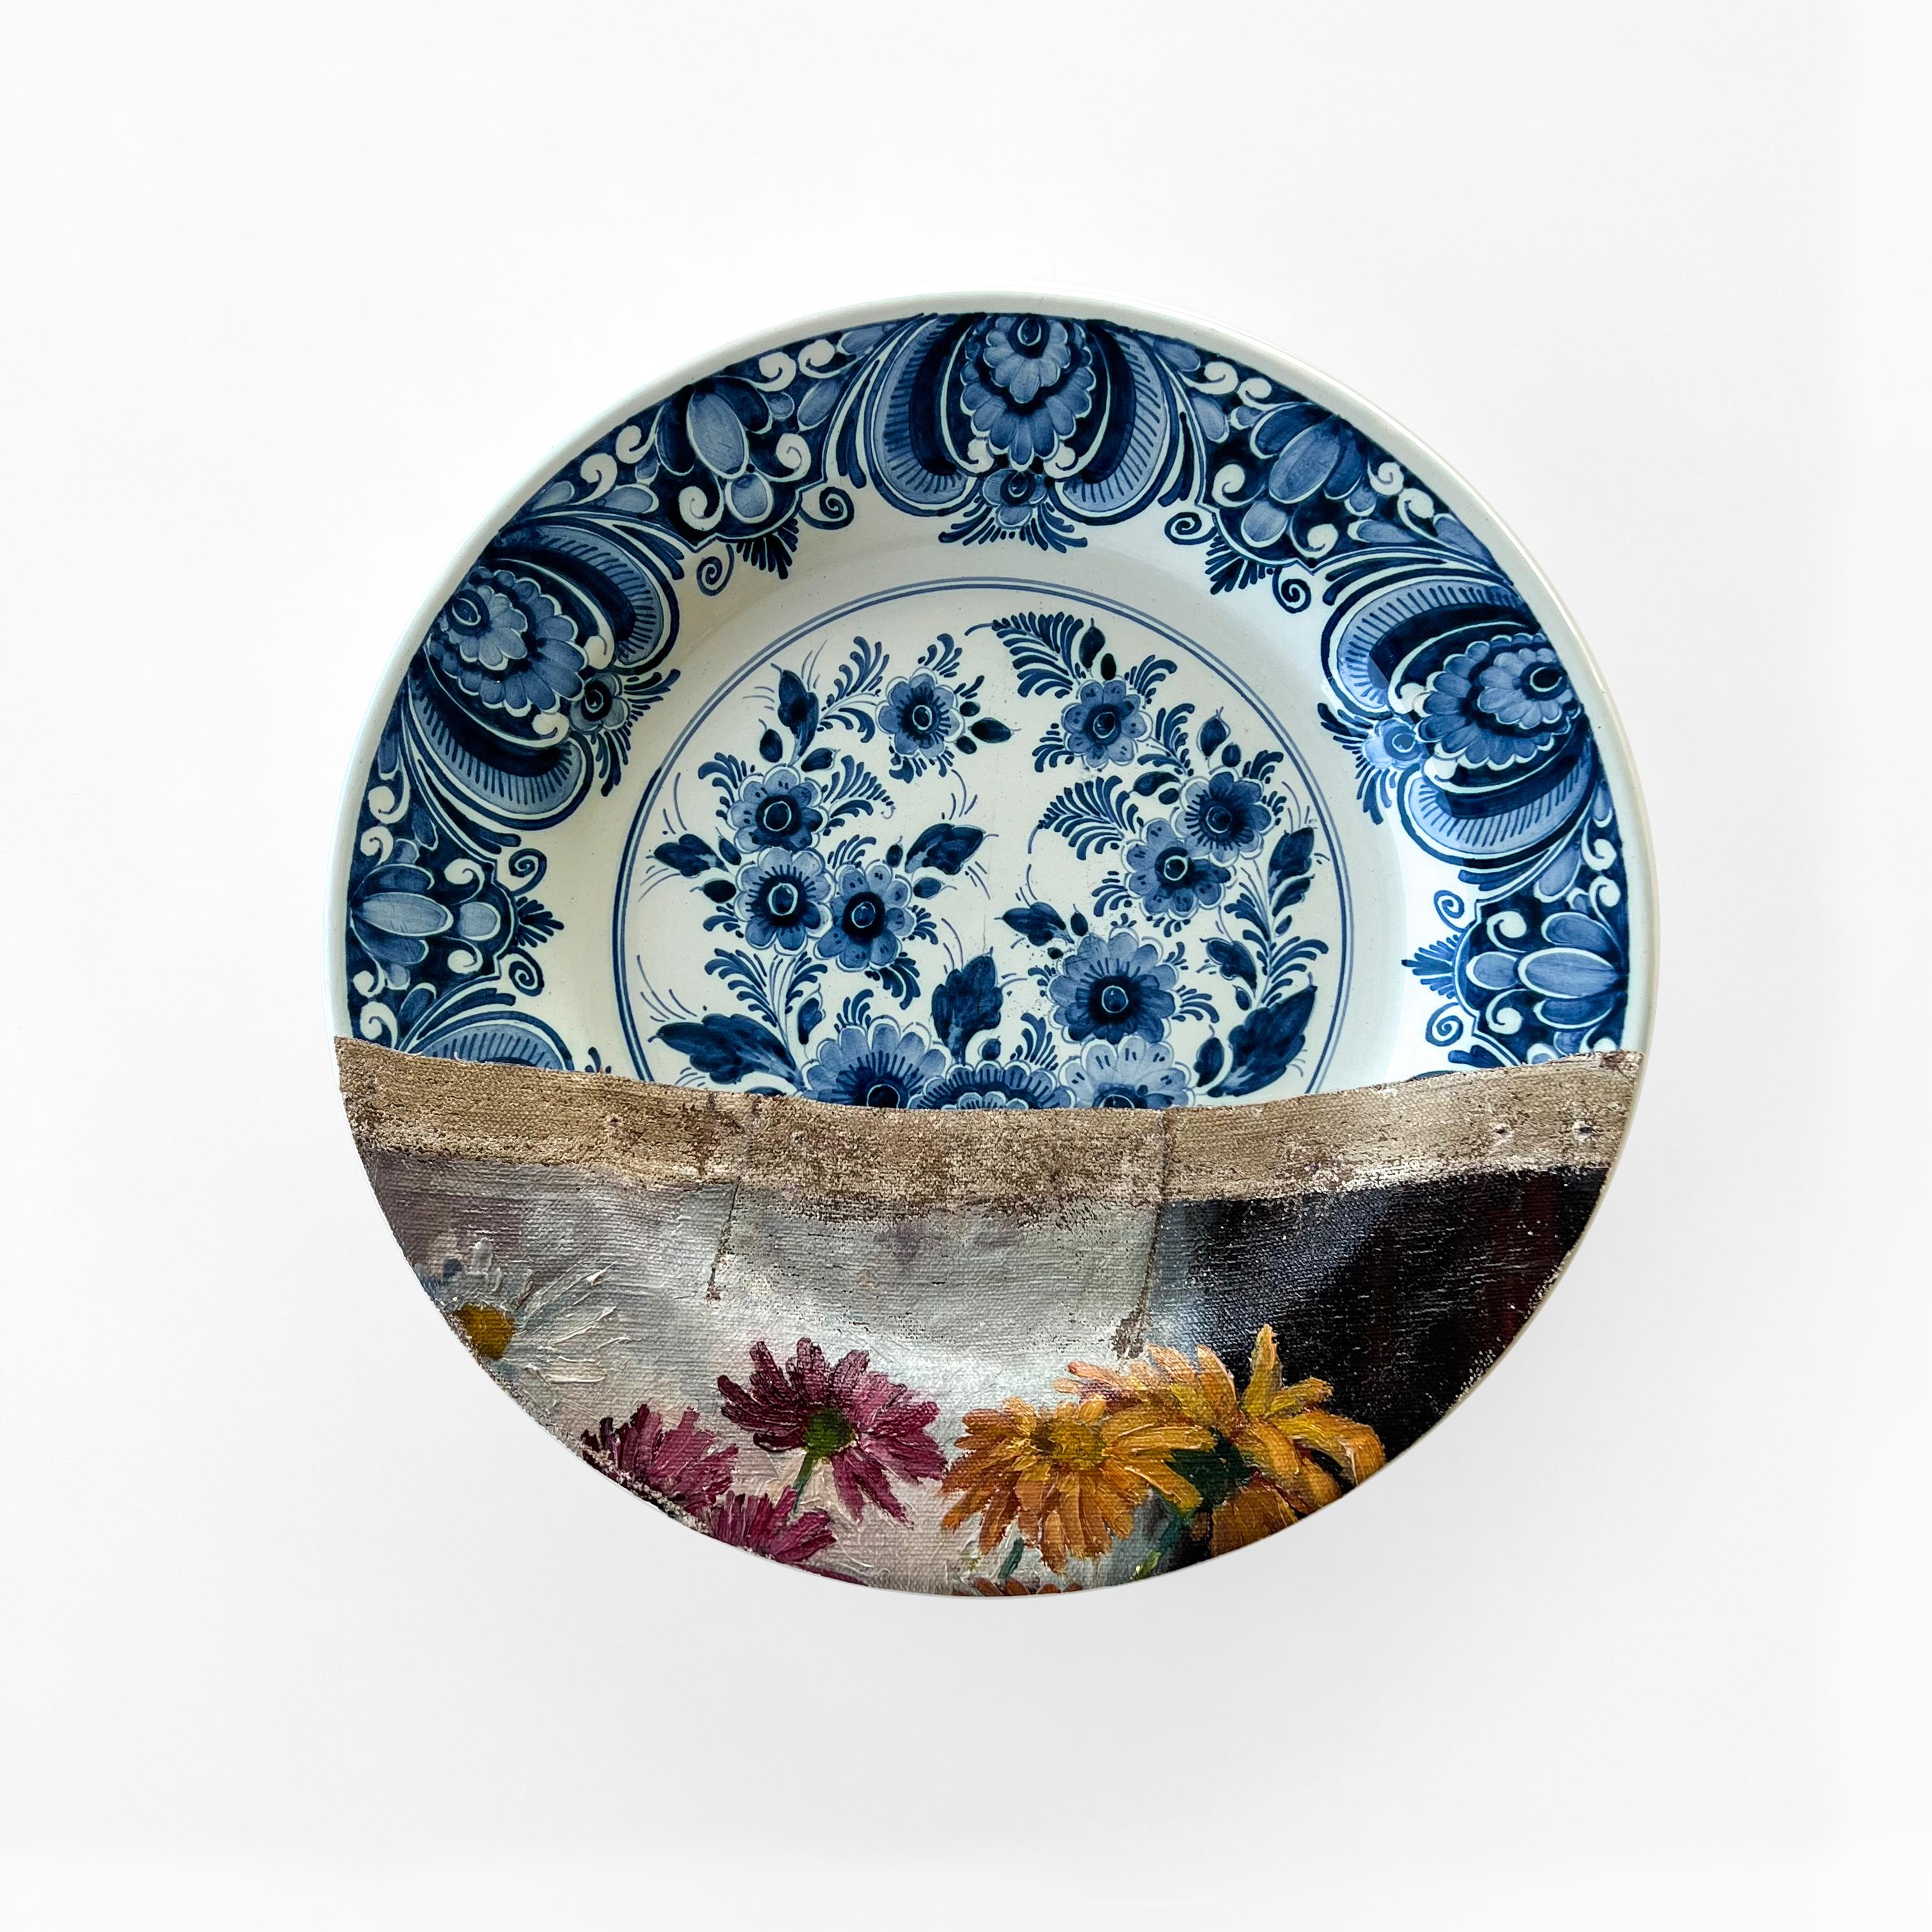 Bouquet in Salt Glazed Pitcher consists of 8 plates combined with a still life of a bouquet of chrysanthemums and asters in a pitcher in salt glazed stoneware.
This artwork includes 2 hand painted Delfts Blue plates: a large Delfts Blue plate from